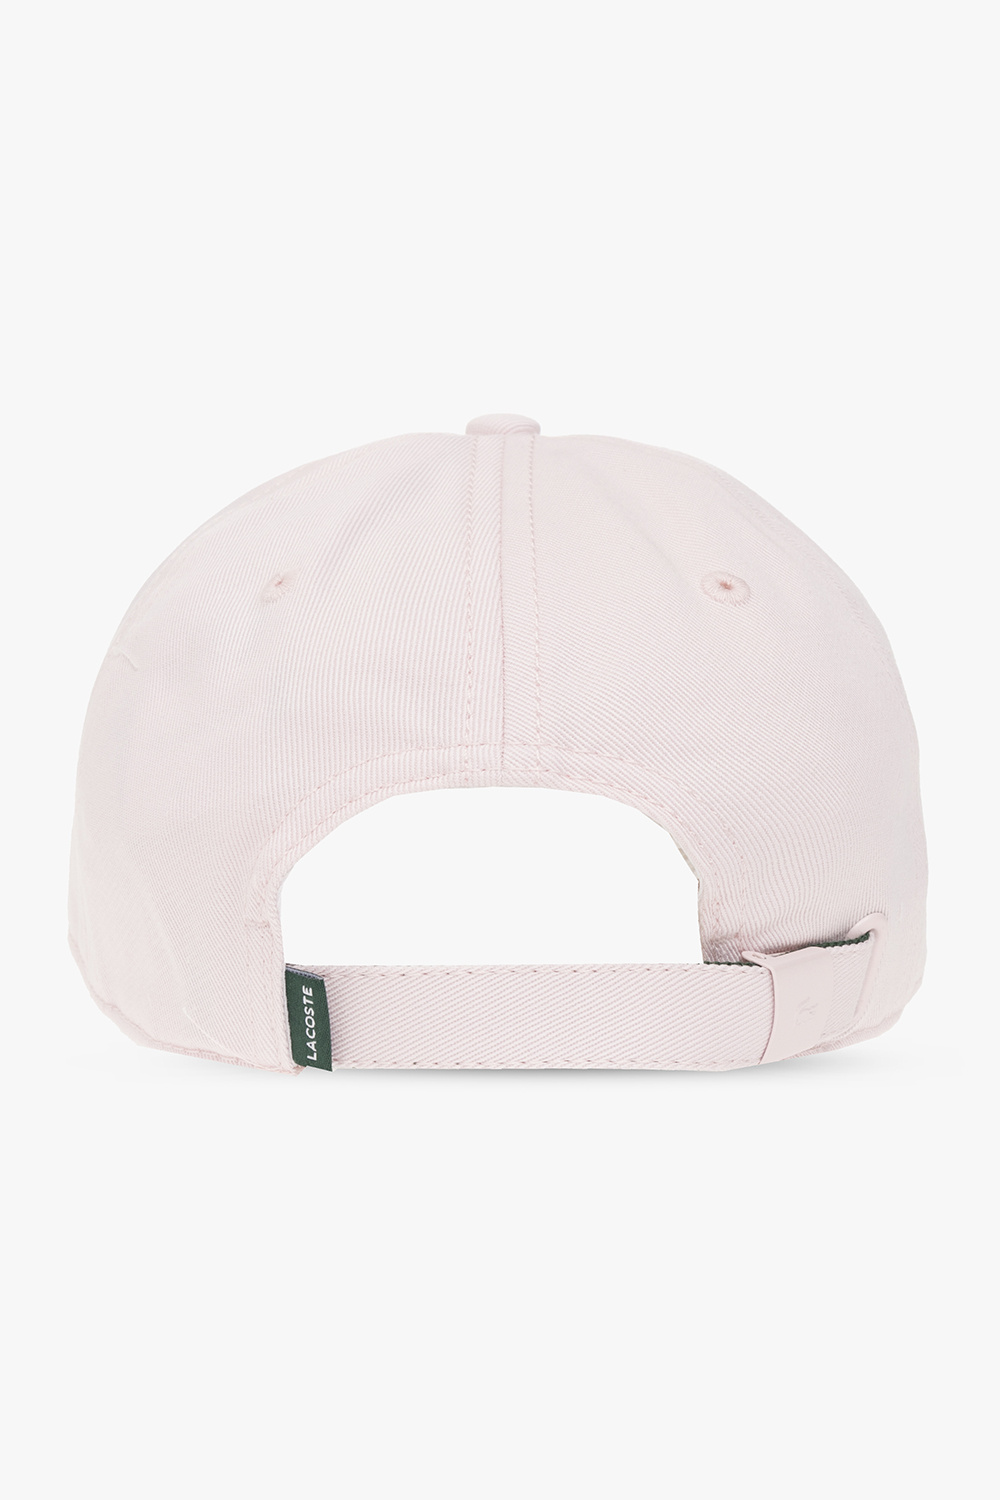 lacoste grn Cap with logo